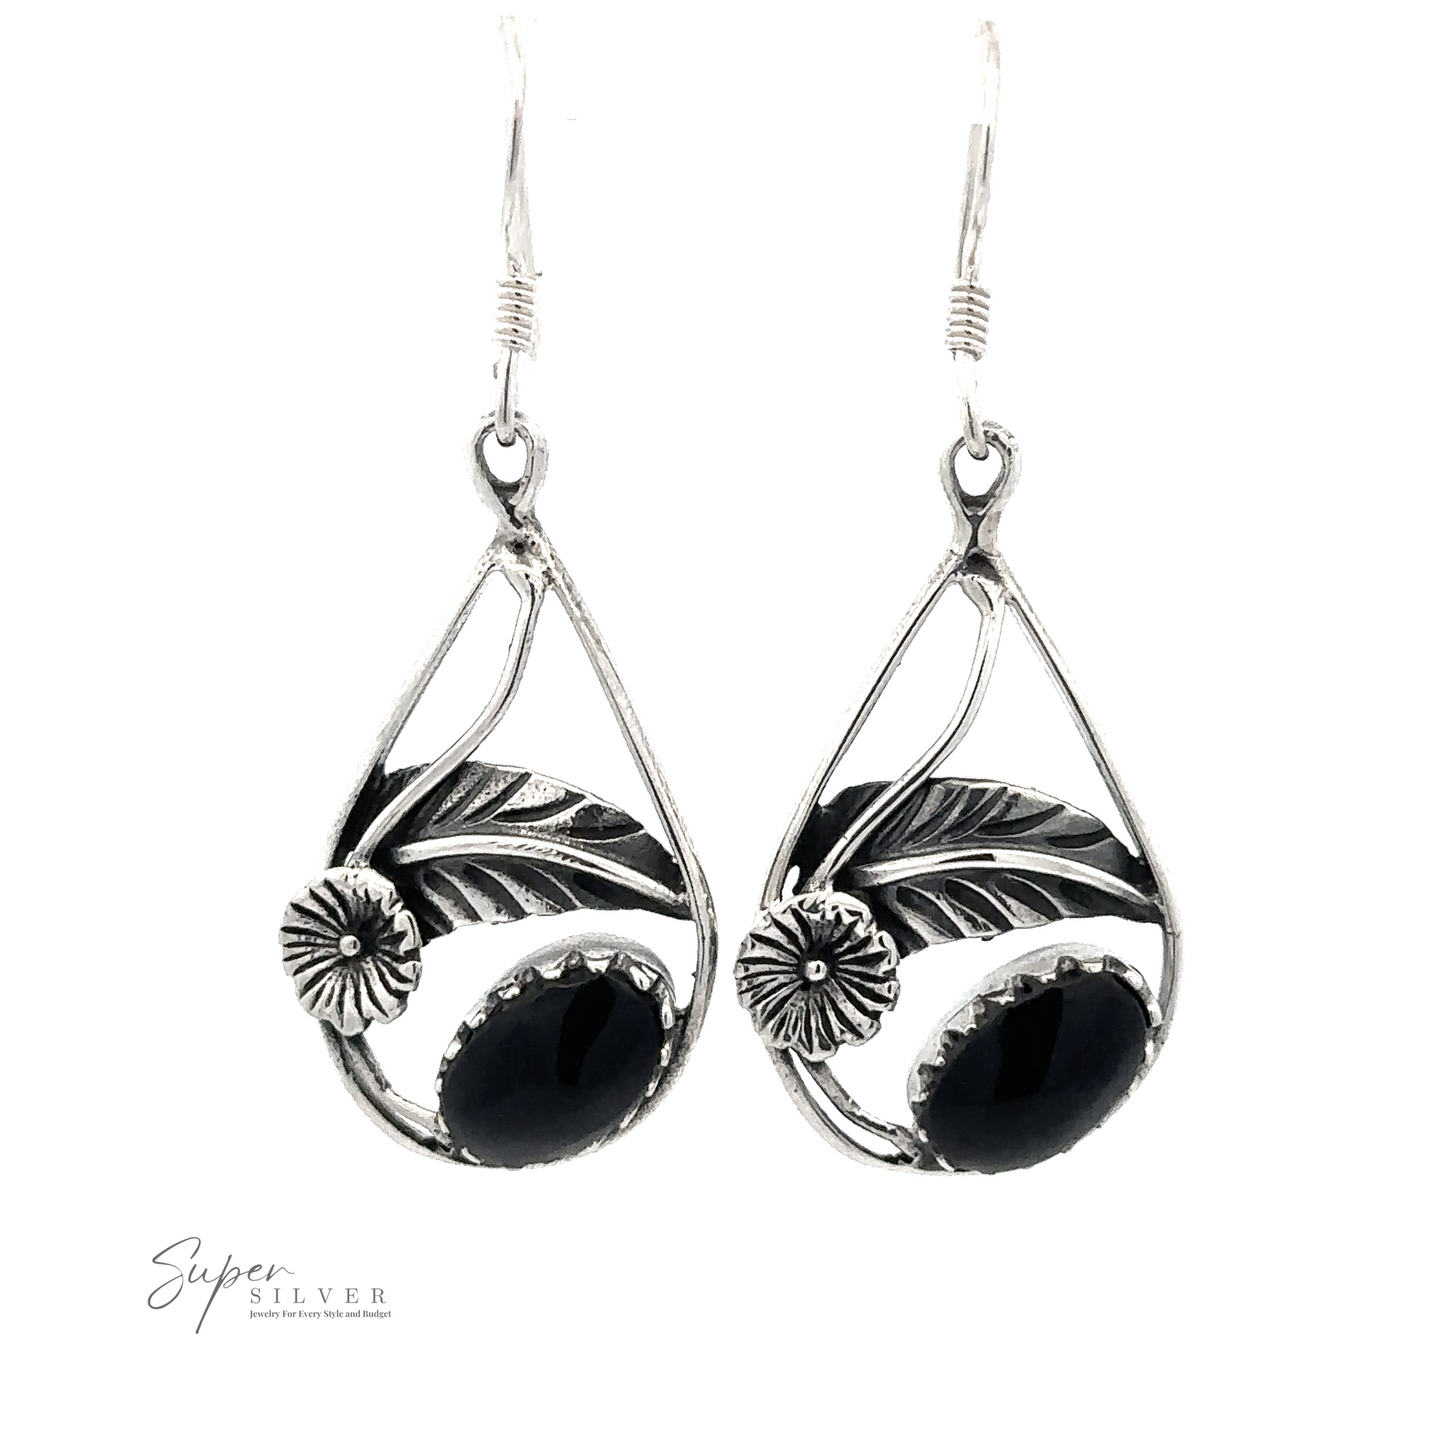 
                  
                    Silver dangle earrings featuring black oval gemstones set within a leaf and floral design, with the logo "Super Silver" in the bottom left corner. These Inlaid Teardrop Earrings With Floral Setting add a touch of elegance to any ensemble.
                  
                